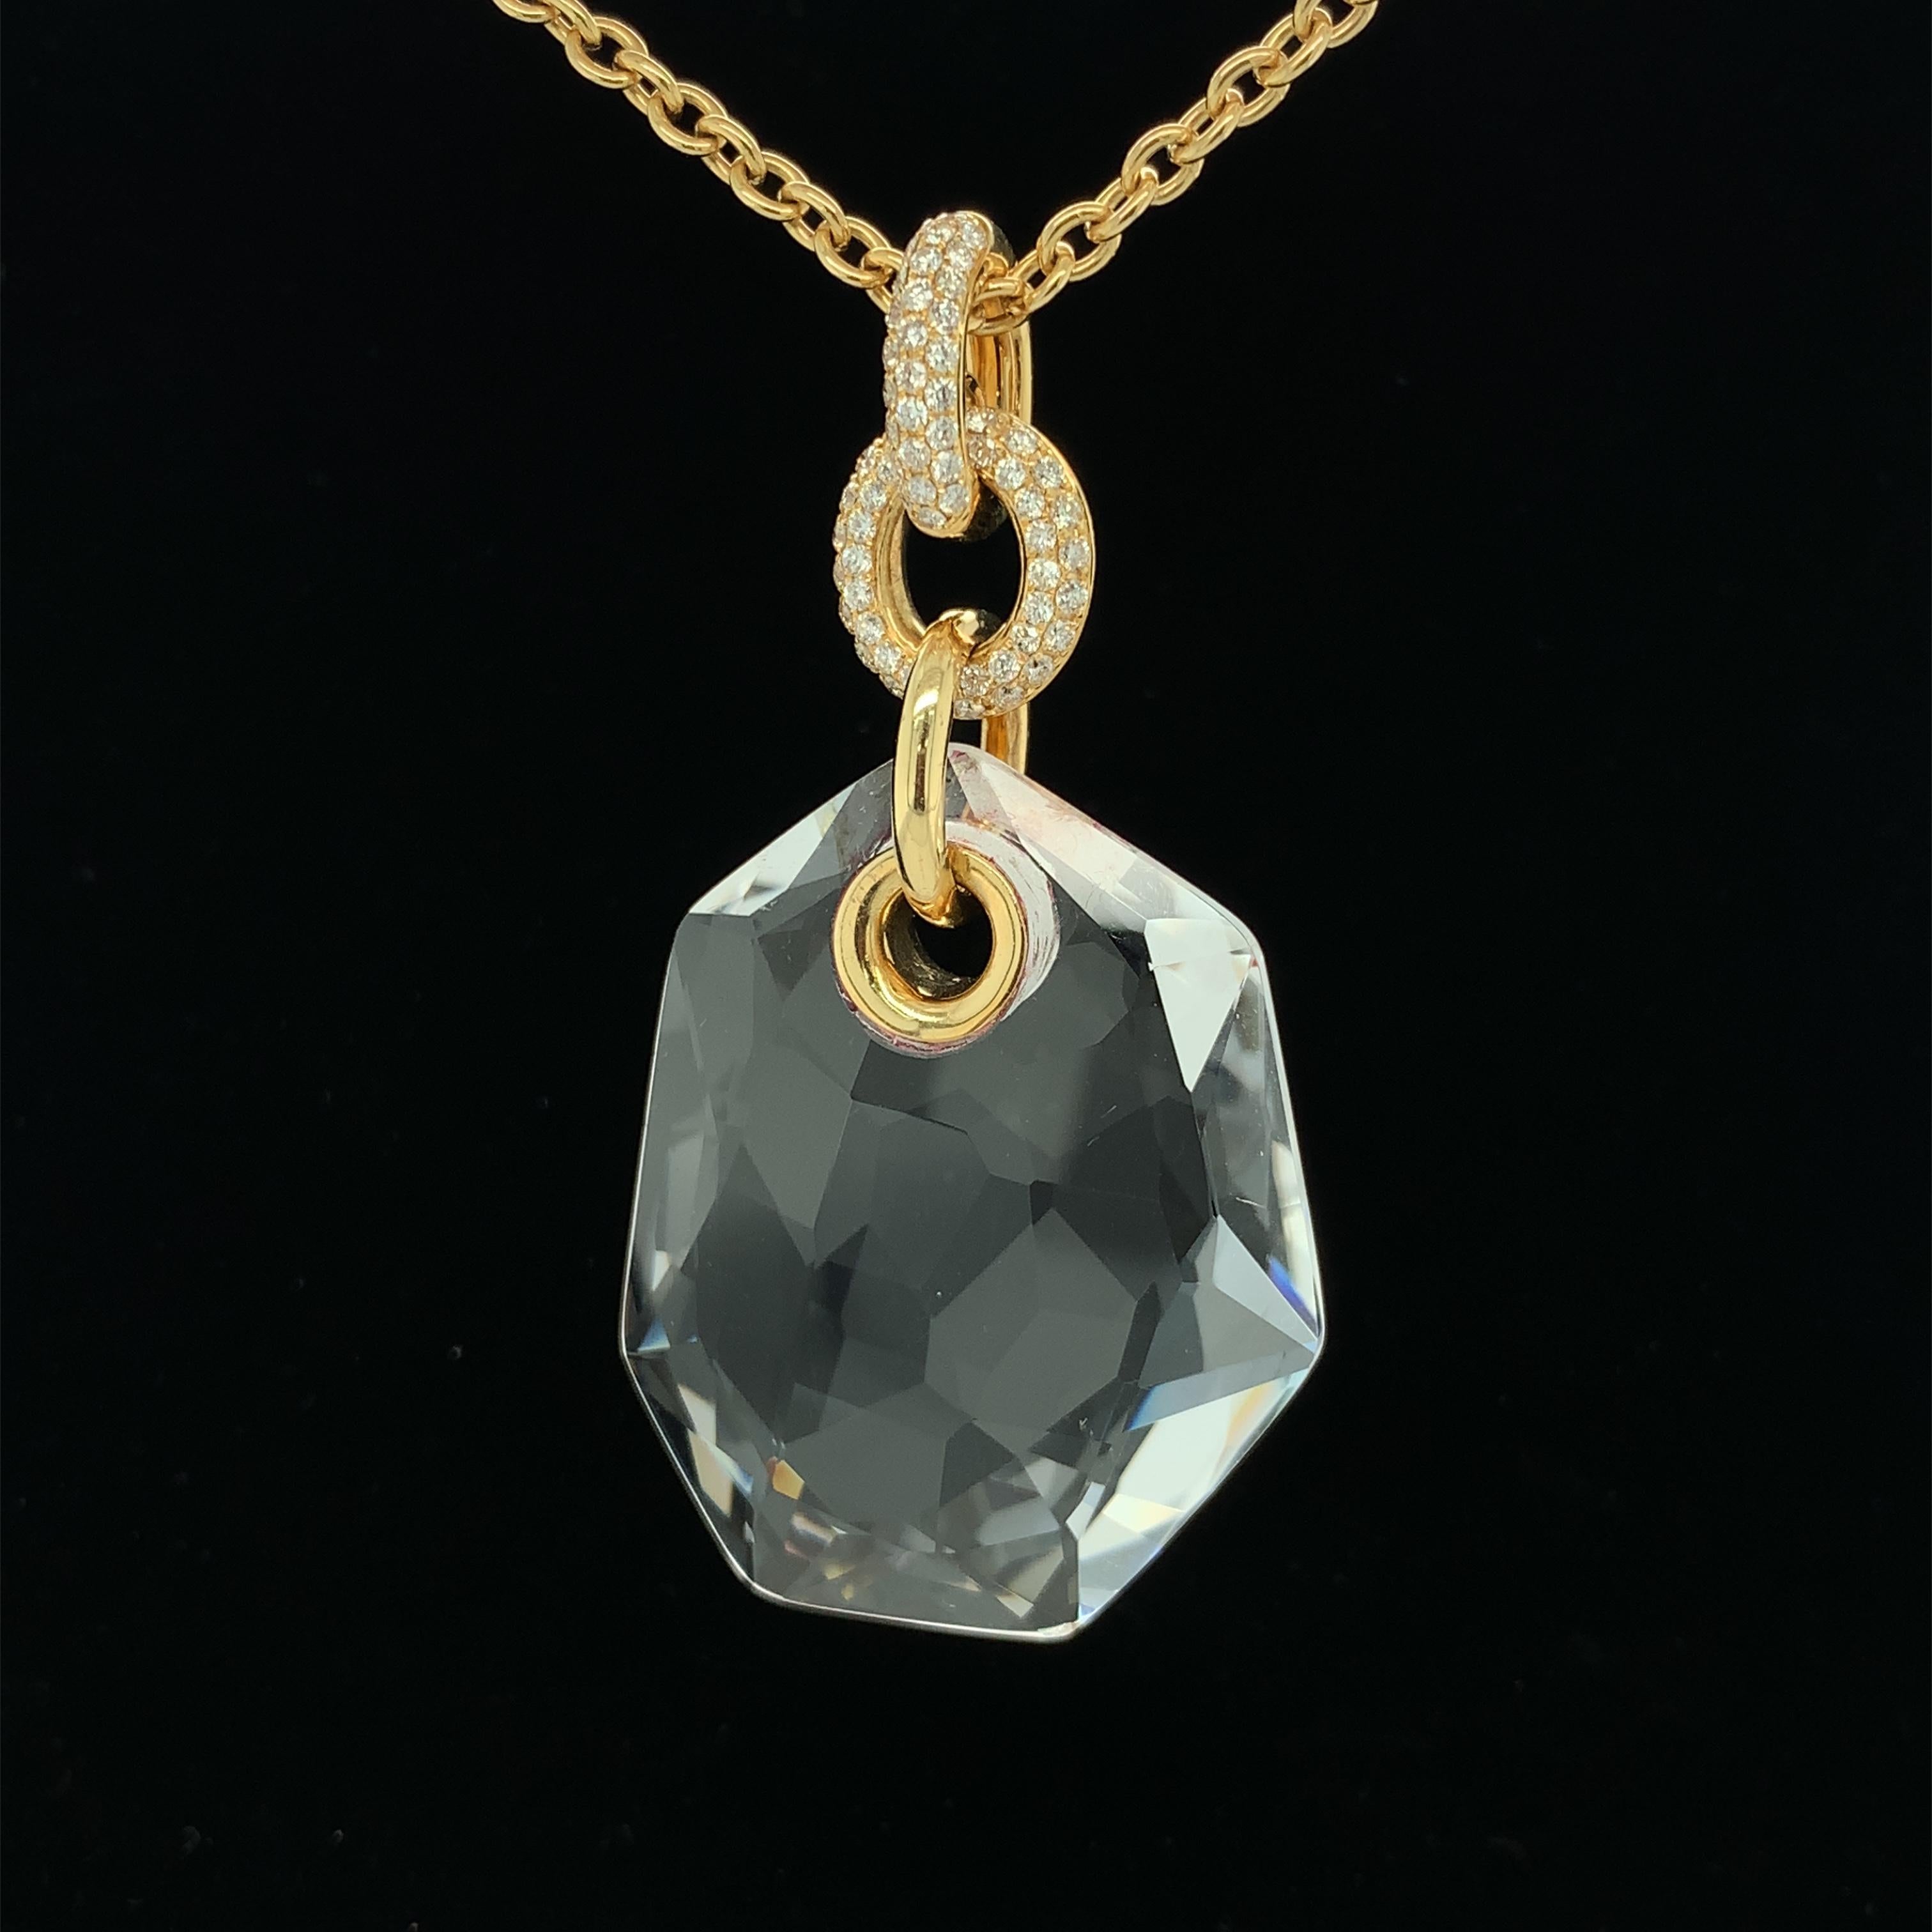 A large asymmetrical piece of faceted rock crystal quartz is featured in this unique pendant. The rock crystal quartz is suspended from links of 18k yellow gold. Two links are pave set with sparkly diamonds; the top link is hinged to open and close